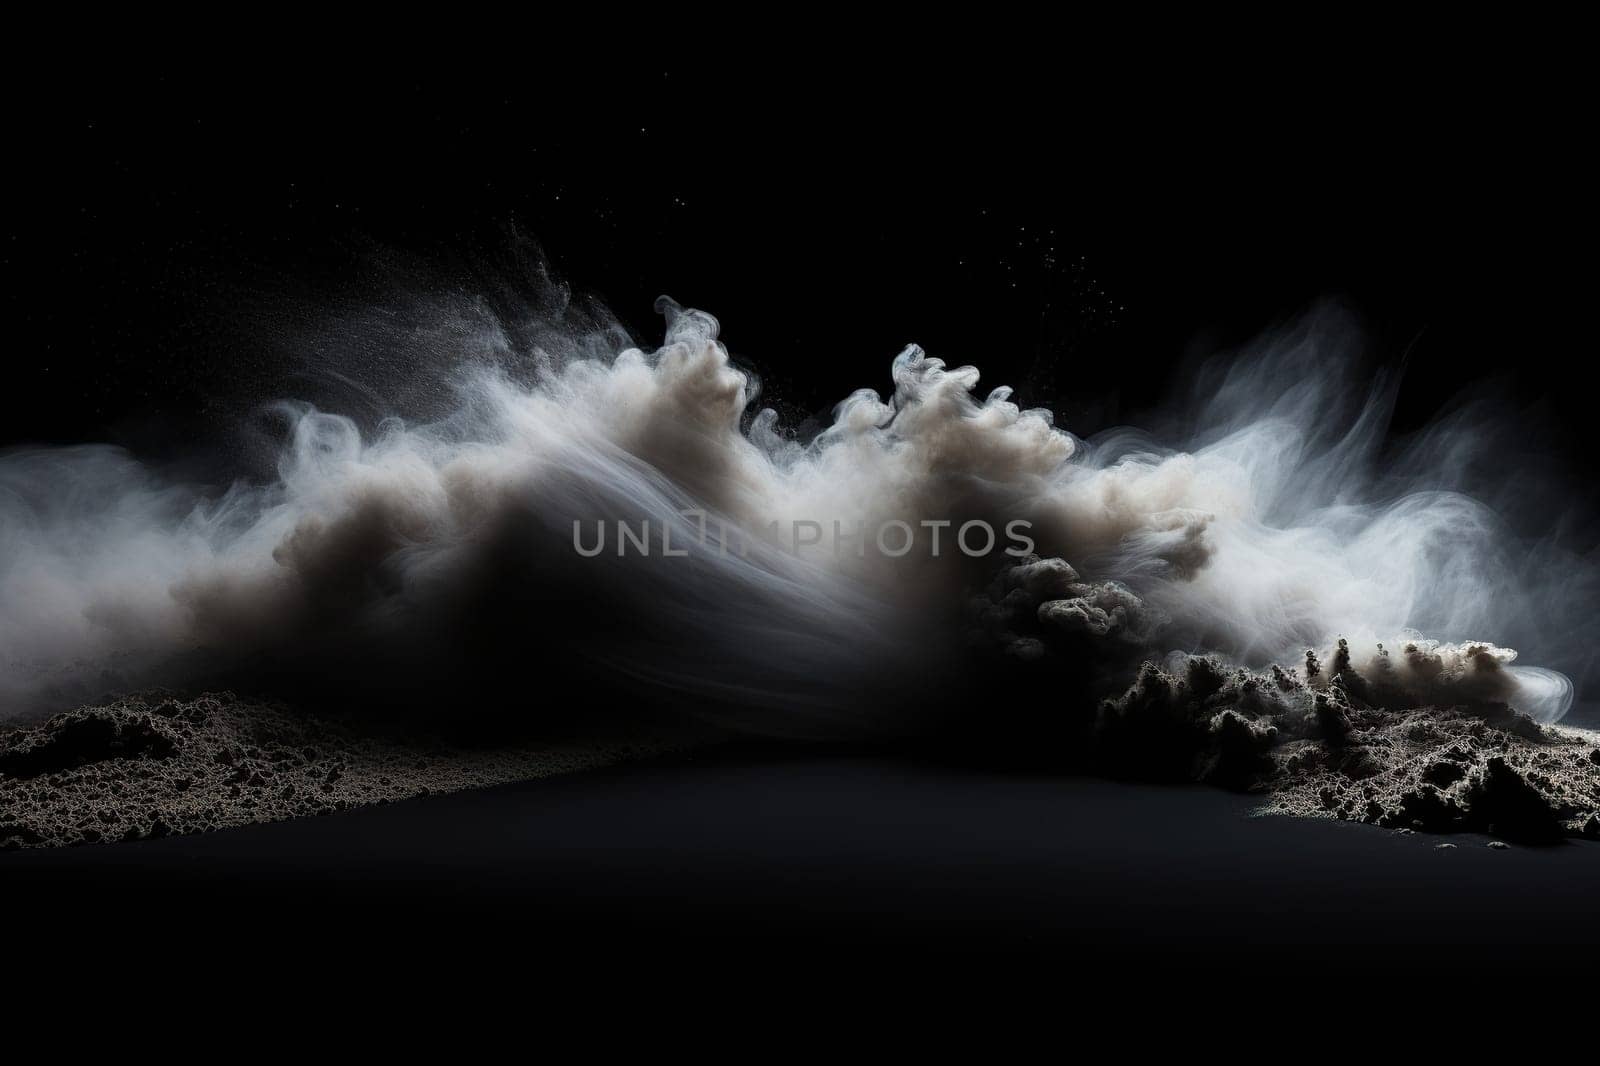 Thick fog, smoke spreads across the black surface in the dark. Abstract background.